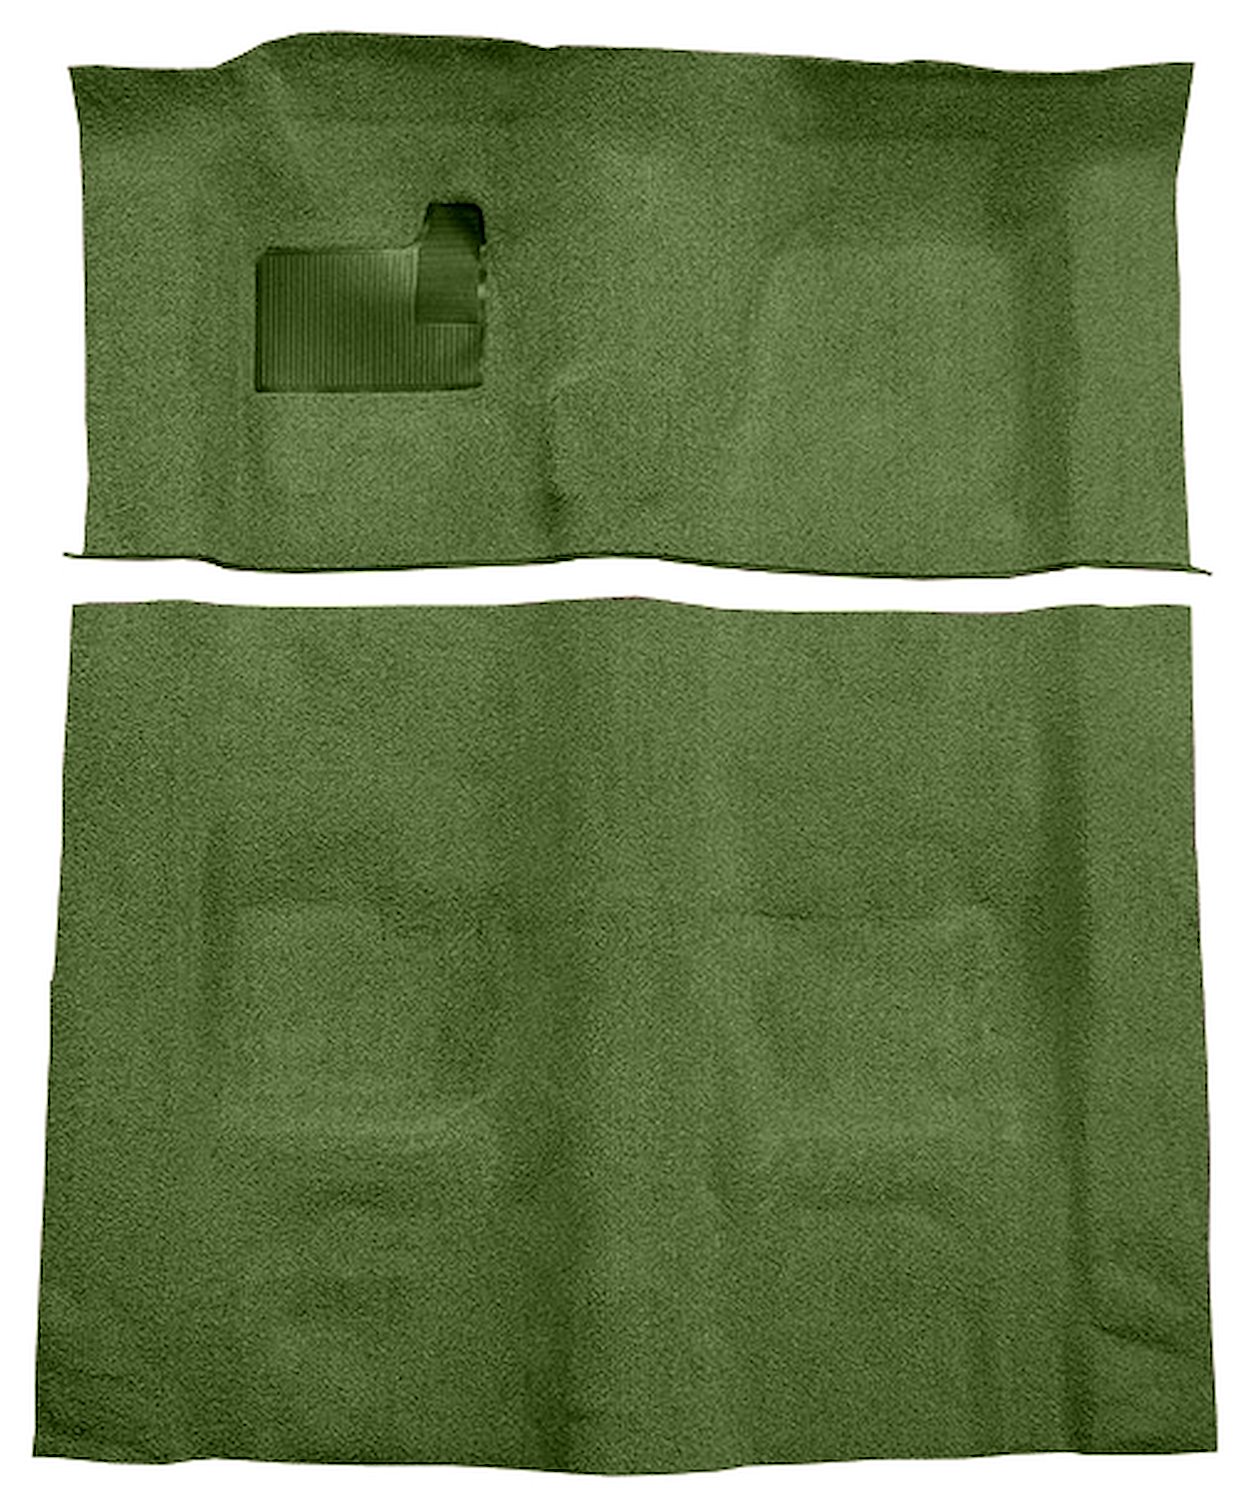 Molded Cut Pile Carpet for 1974-1975 Chevy Camaro, Pontiac Firebird [OE-Style Jute Backing, 4-Speed Transmission, Willow Green]